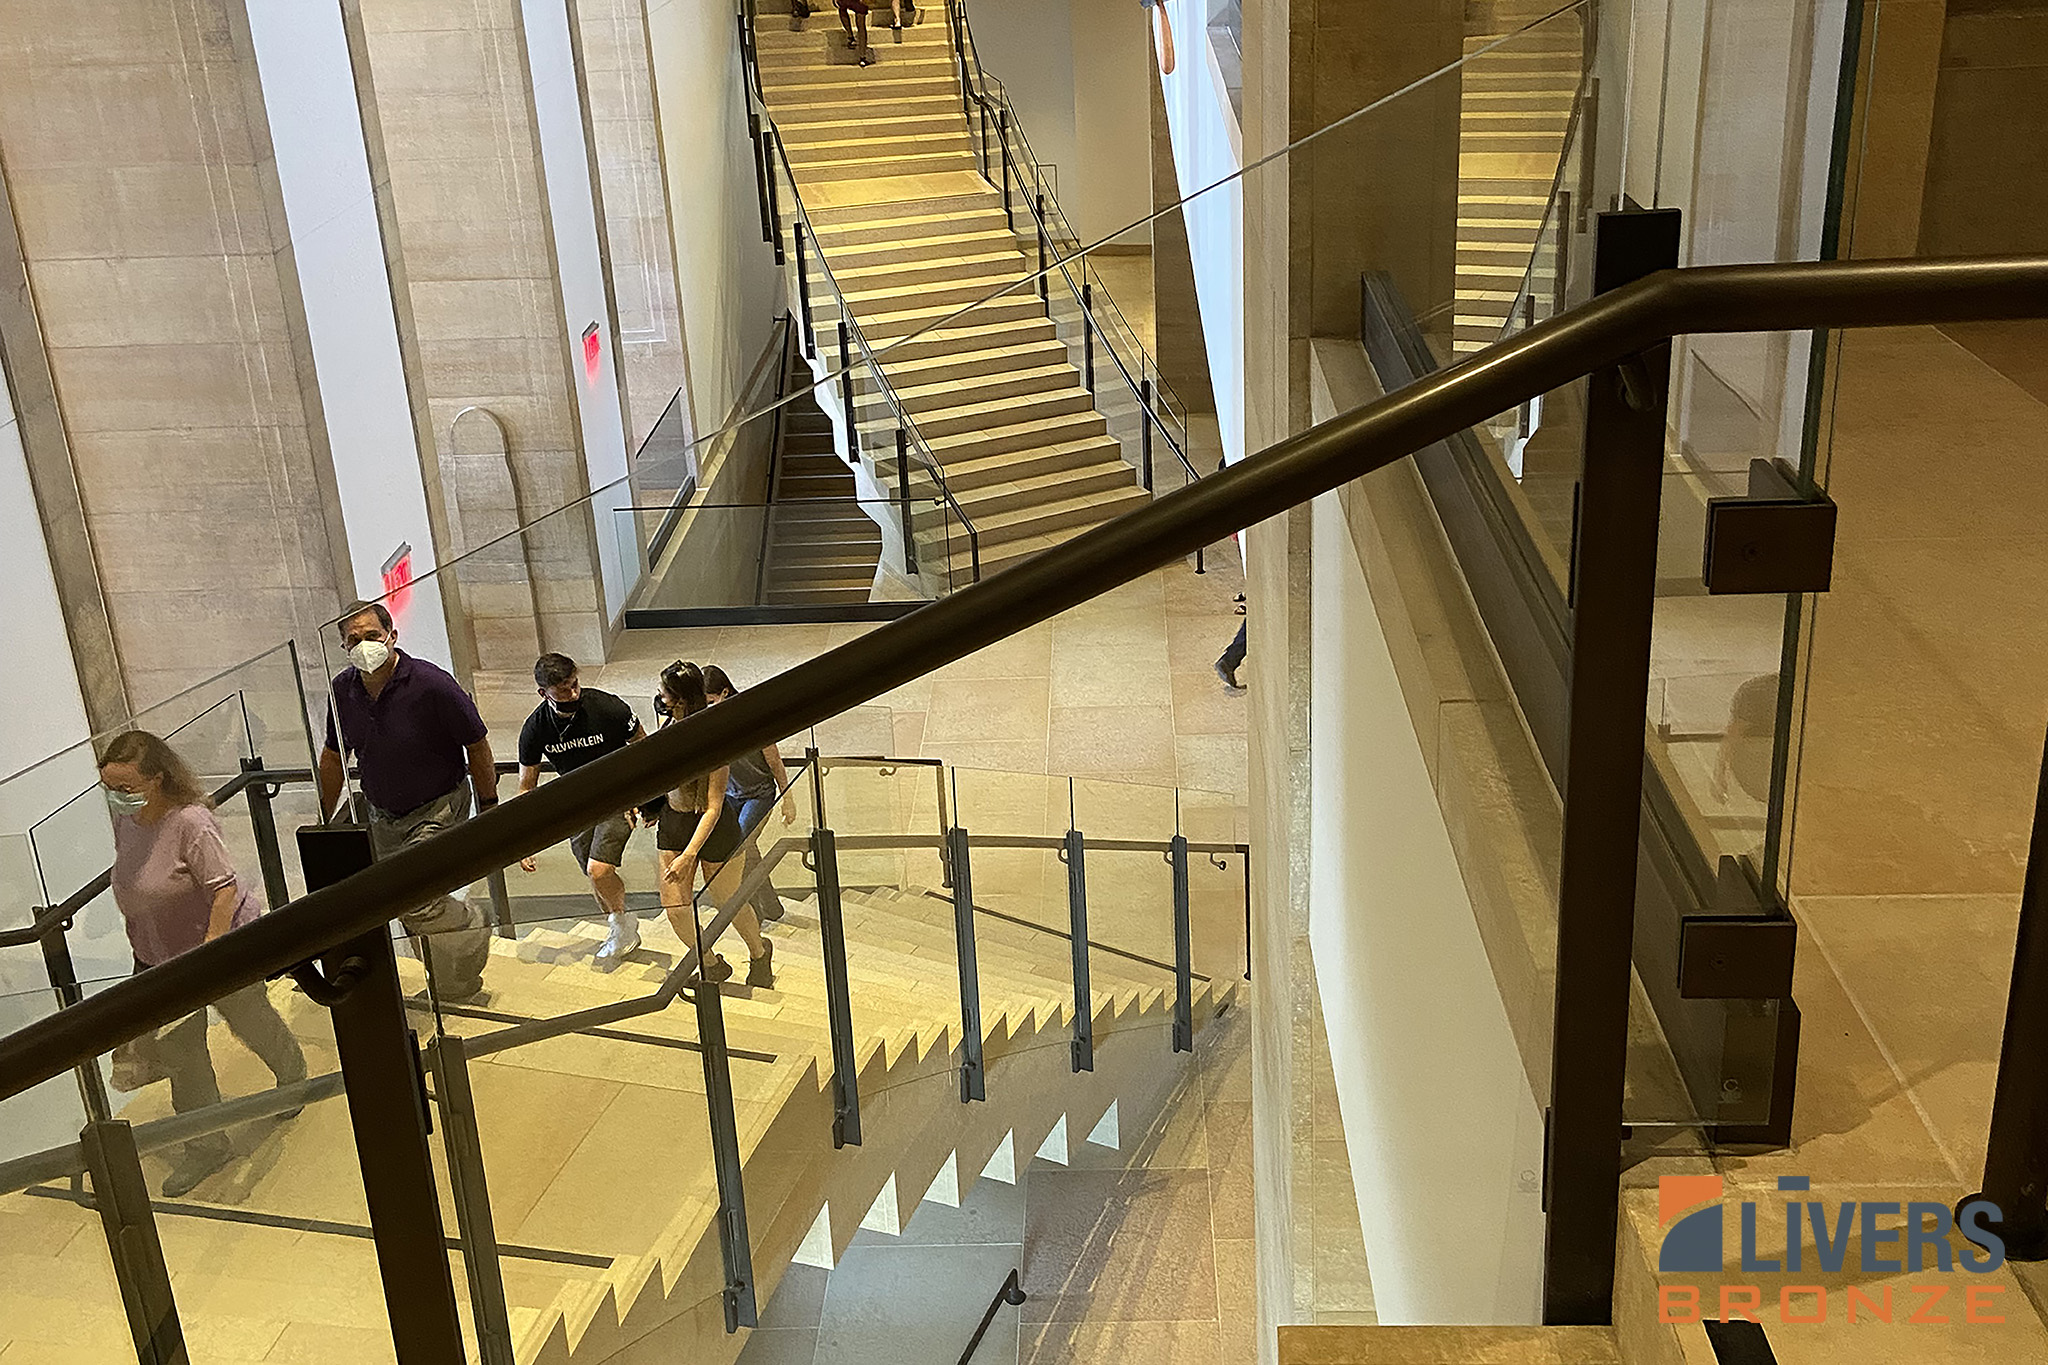 Livers Bronze Custom Bronze Railings were installed at the Lobby Stairs at the Philadelphia Museum of Art and were made in the USA.